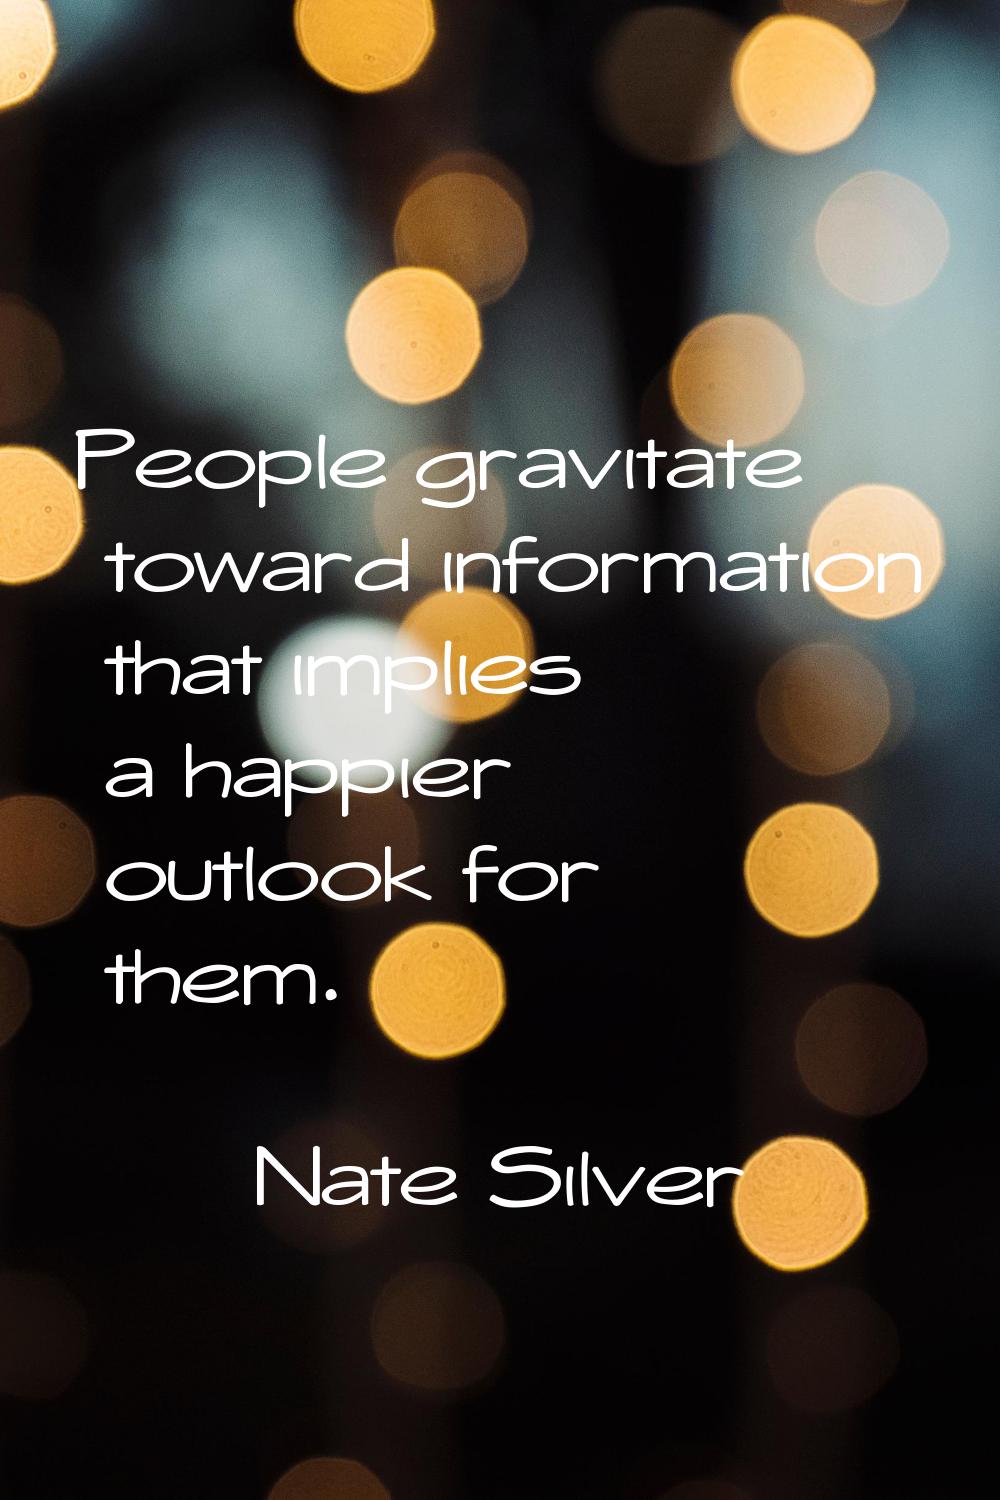 People gravitate toward information that implies a happier outlook for them.